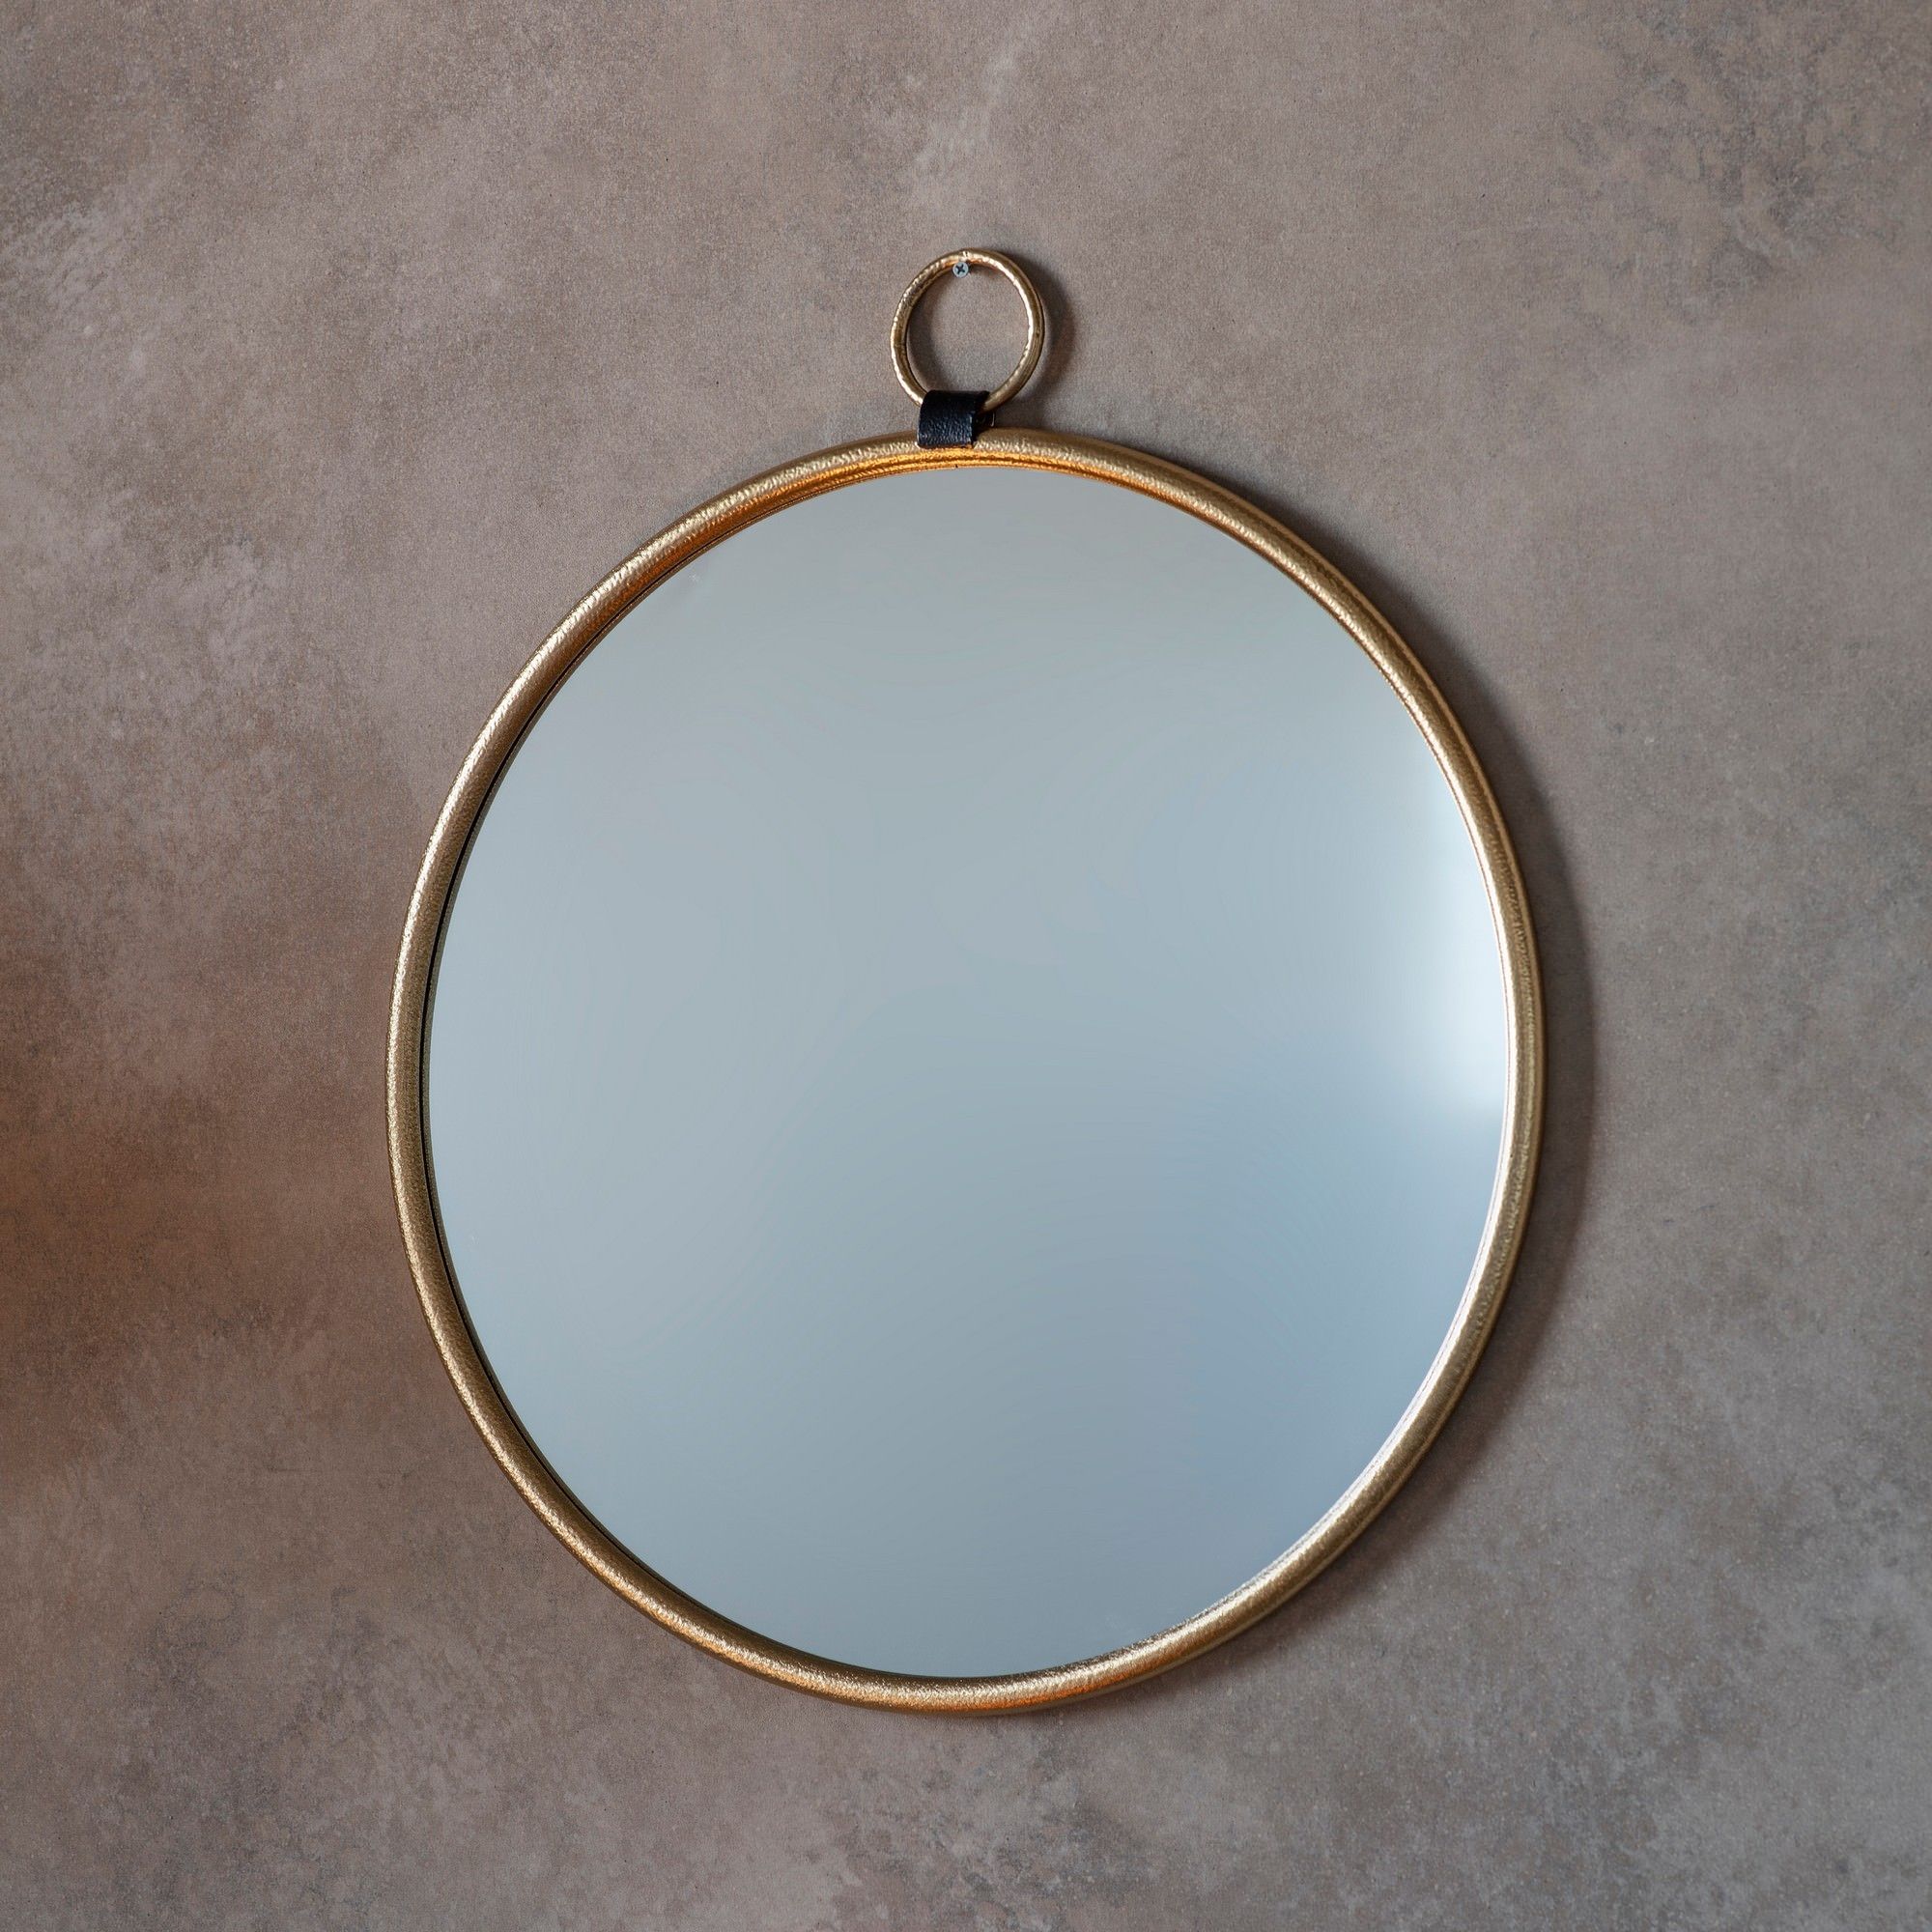 Bainbridge Iron Frame Round Wall Mirror, 70Cm, Gold Pertaining To Gold Rounded Corner Wall Mirrors (View 9 of 15)